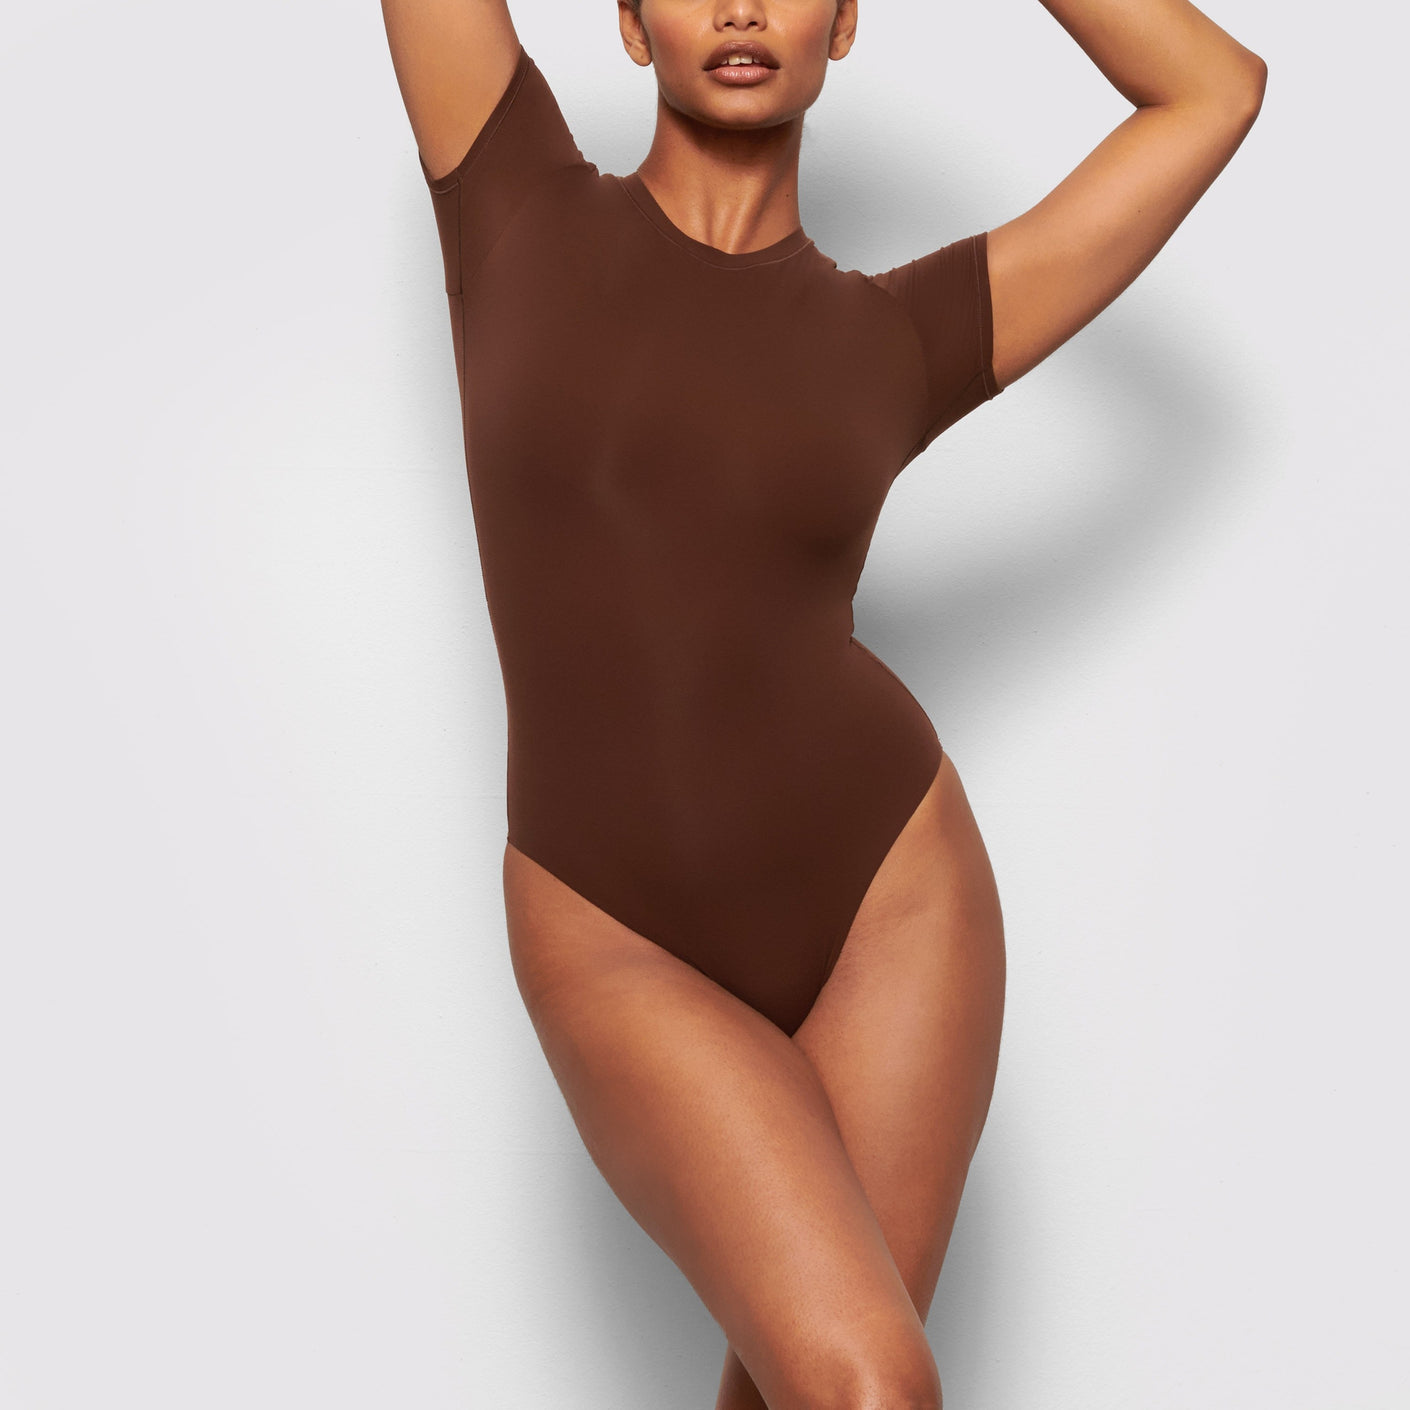 FITS EVERYBODY T-SHIRT BODYSUIT | COCOA